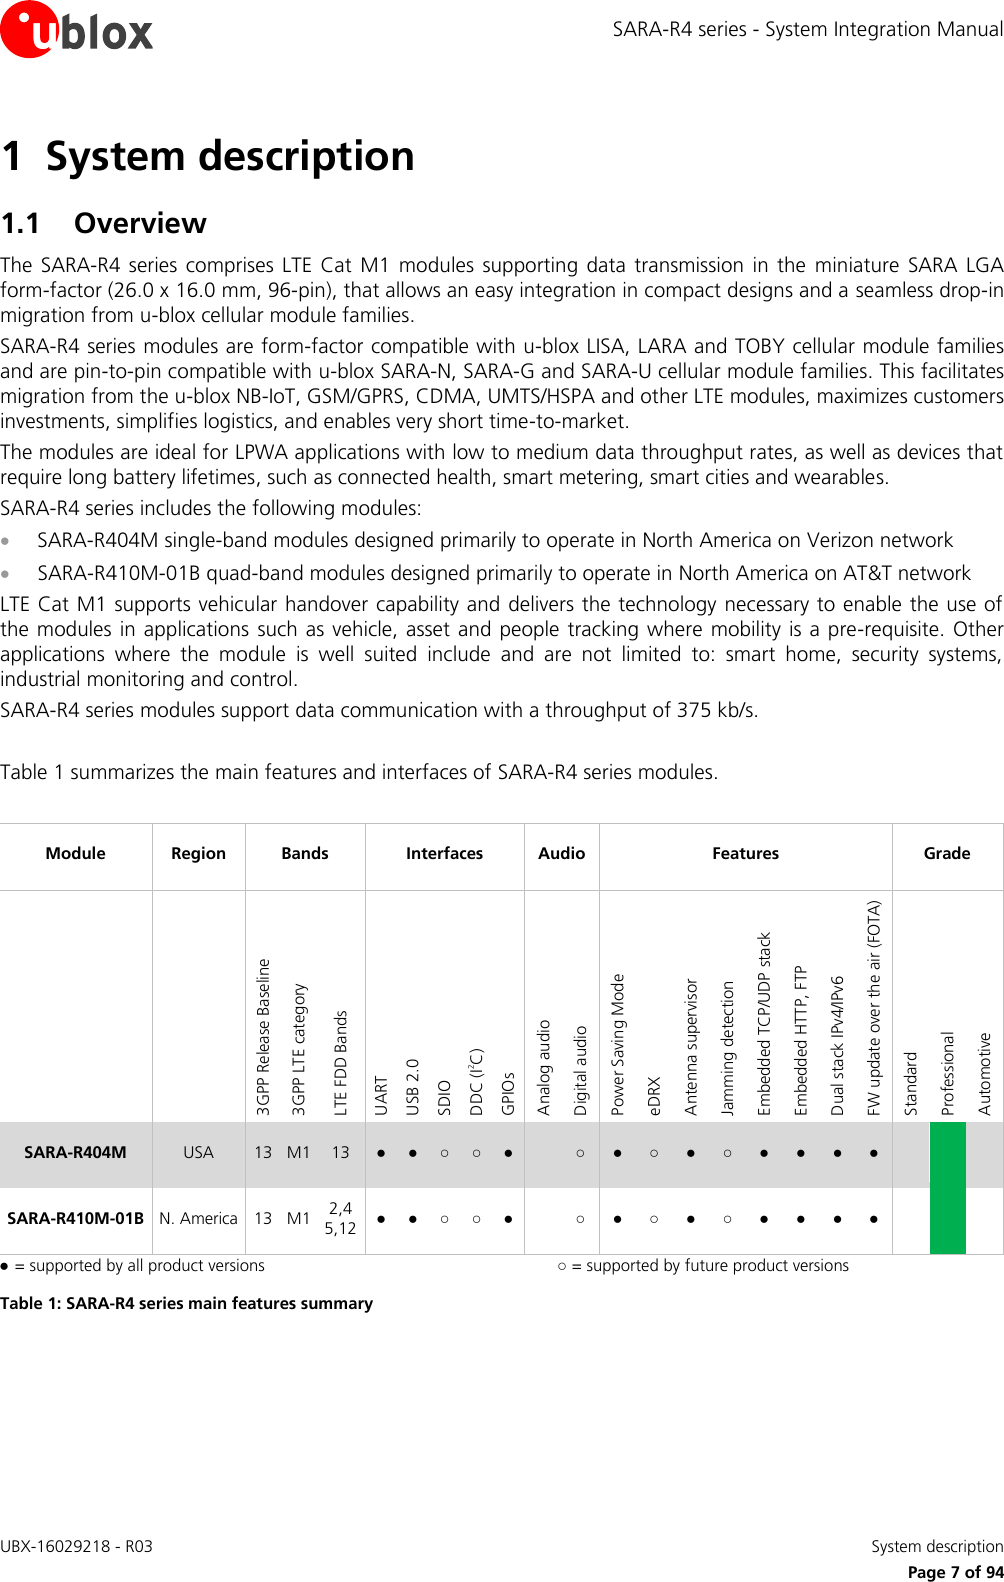 SARA-R4 series - System Integration Manual UBX-16029218 - R03    System description     Page 7 of 94 1 System description 1.1 Overview The  SARA-R4  series  comprises  LTE Cat  M1  modules  supporting data  transmission  in the  miniature  SARA LGA form-factor (26.0 x 16.0 mm, 96-pin), that allows an easy integration in compact designs and a seamless drop-in migration from u-blox cellular module families.  SARA-R4 series modules are form-factor compatible with u-blox LISA, LARA and TOBY cellular module families and are pin-to-pin compatible with u-blox SARA-N, SARA-G and SARA-U cellular module families. This facilitates migration from the u-blox NB-IoT, GSM/GPRS, CDMA, UMTS/HSPA and other LTE modules, maximizes customers investments, simplifies logistics, and enables very short time-to-market. The modules are ideal for LPWA applications with low to medium data throughput rates, as well as devices that require long battery lifetimes, such as connected health, smart metering, smart cities and wearables. SARA-R4 series includes the following modules:  SARA-R404M single-band modules designed primarily to operate in North America on Verizon network  SARA-R410M-01B quad-band modules designed primarily to operate in North America on AT&amp;T network LTE Cat M1 supports vehicular handover capability and delivers the technology necessary to enable the use of the modules in applications  such as vehicle, asset and people tracking where mobility is a pre-requisite. Other applications  where  the  module  is  well  suited  include  and  are  not  limited  to:  smart  home,  security  systems, industrial monitoring and control. SARA-R4 series modules support data communication with a throughput of 375 kb/s.  Table 1 summarizes the main features and interfaces of SARA-R4 series modules.  Module Region Bands Interfaces Audio Features Grade   3GPP Release Baseline  3GPP LTE category LTE FDD Bands UART USB 2.0 SDIO  DDC (I2C) GPIOs Analog audio Digital audio  Power Saving Mode eDRX Antenna supervisor Jamming detection Embedded TCP/UDP stack Embedded HTTP, FTP Dual stack IPv4/IPv6 FW update over the air (FOTA)  Standard Professional Automotive SARA-R404M USA 13 M1 13 ● ● ○ ○ ●  ○ ● ○ ● ○ ● ● ● ●    SARA-R410M-01B N. America 13 M1 2,4 5,12 ● ● ○ ○ ●  ○ ● ○ ● ○ ● ● ● ●    ● = supported by all product versions ○ = supported by future product versions Table 1: SARA-R4 series main features summary    